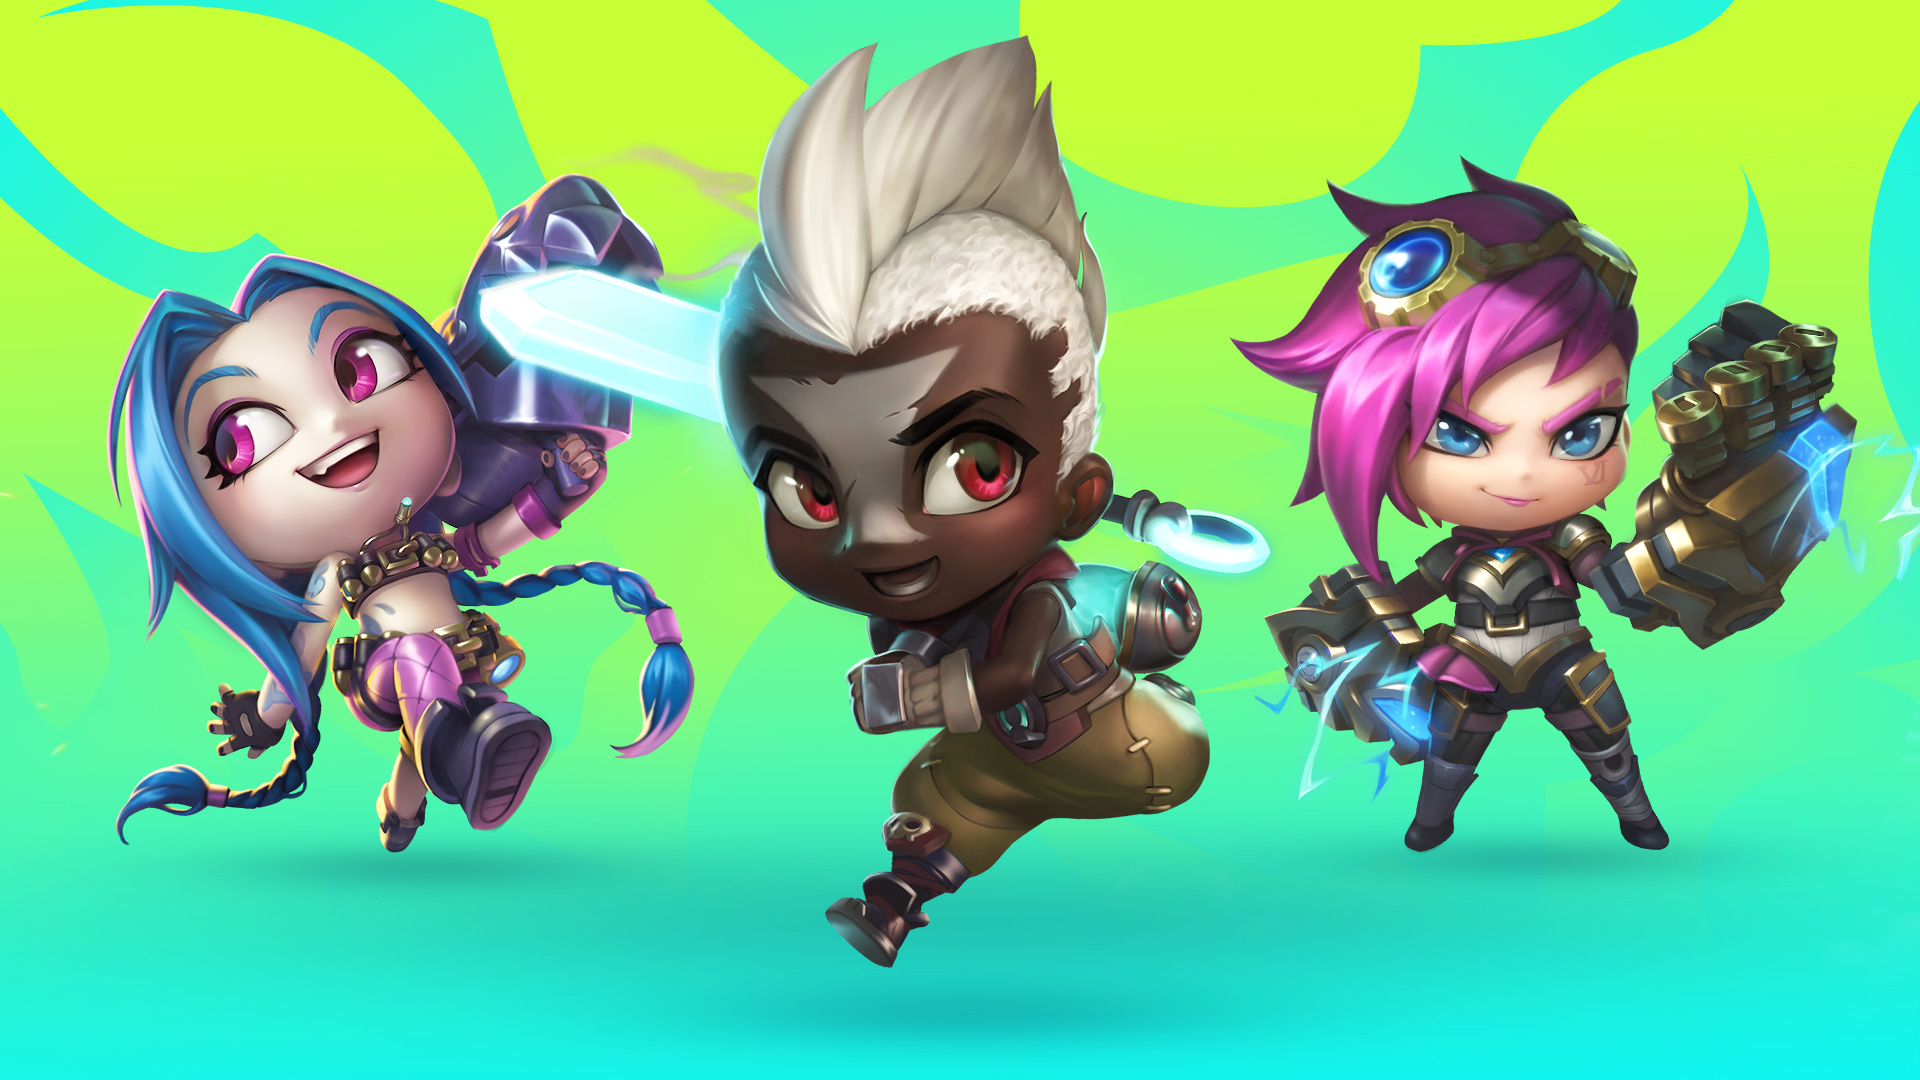 Players Were Outraged For The Price Of The New Chibi Champion Is Even More Expensive Than A Legendary Skin Not A Gamer